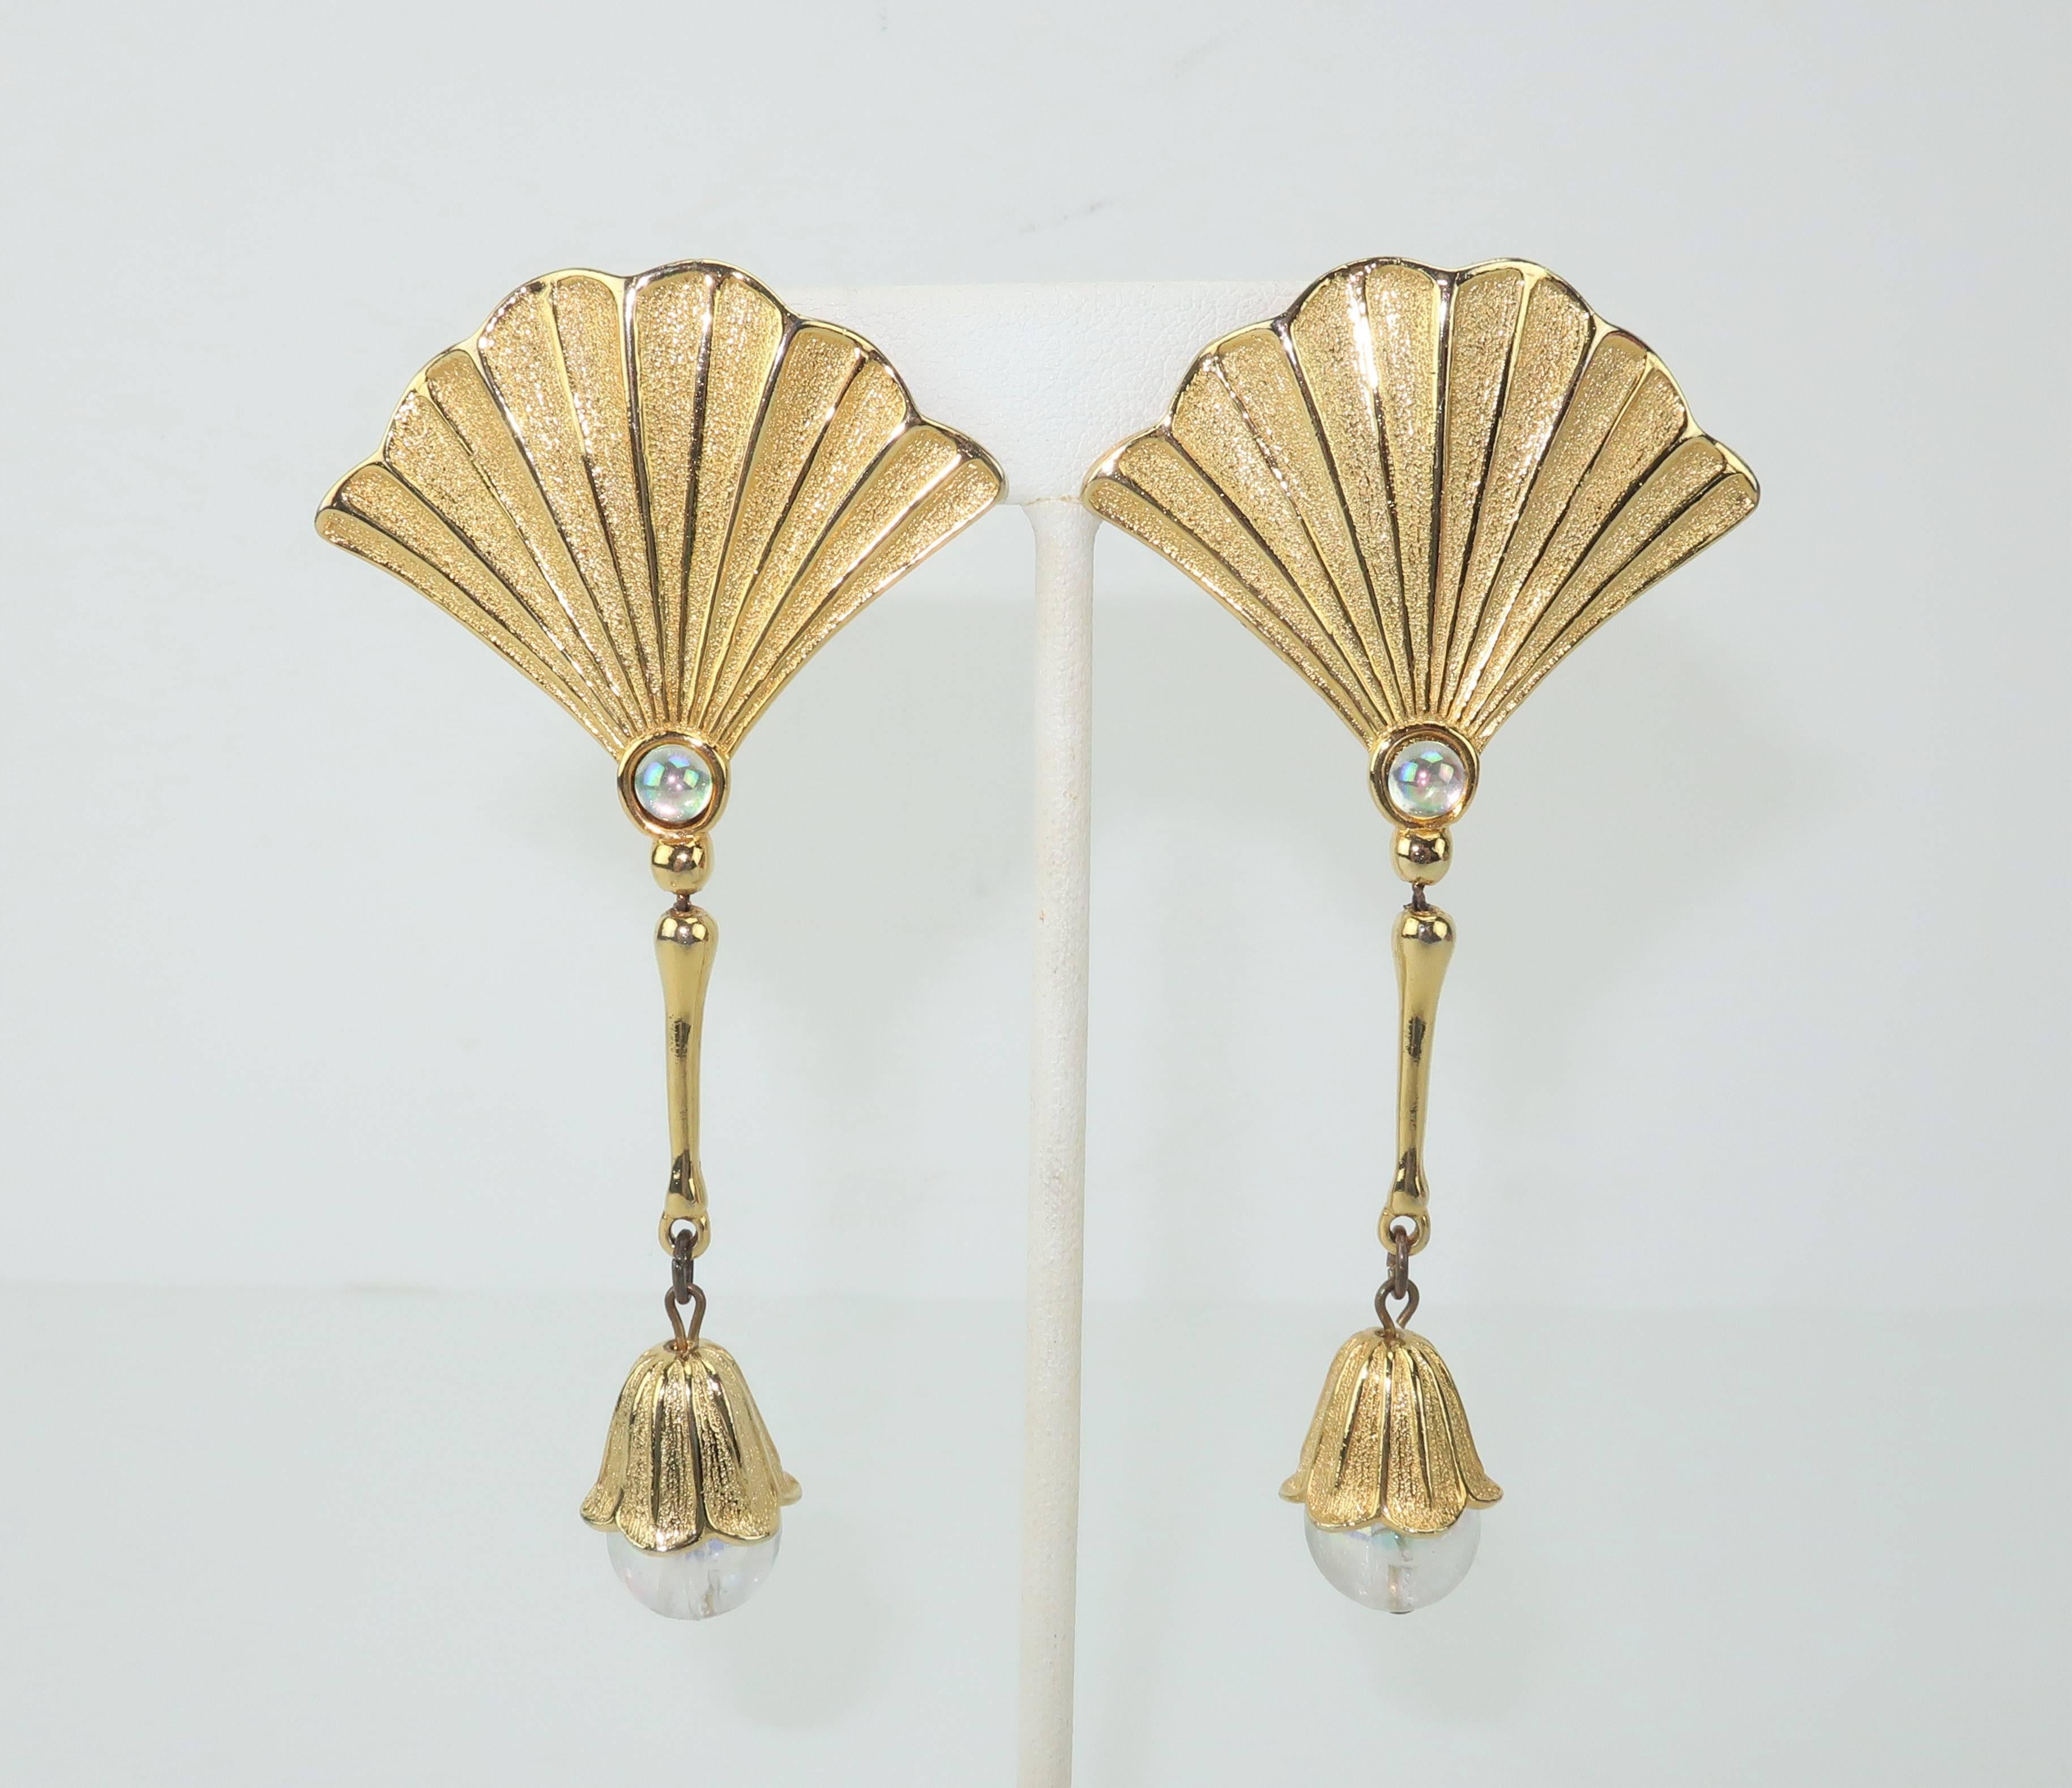 The Ginkgo tree represents longevity and endurance in Eastern culture and indeed, these 1970's Ginkgo leaf shaped earrings by Jonette Jewelry have withstood the test of time and remain a stylish choice for a modern wardrobe.  The delicate gold tone